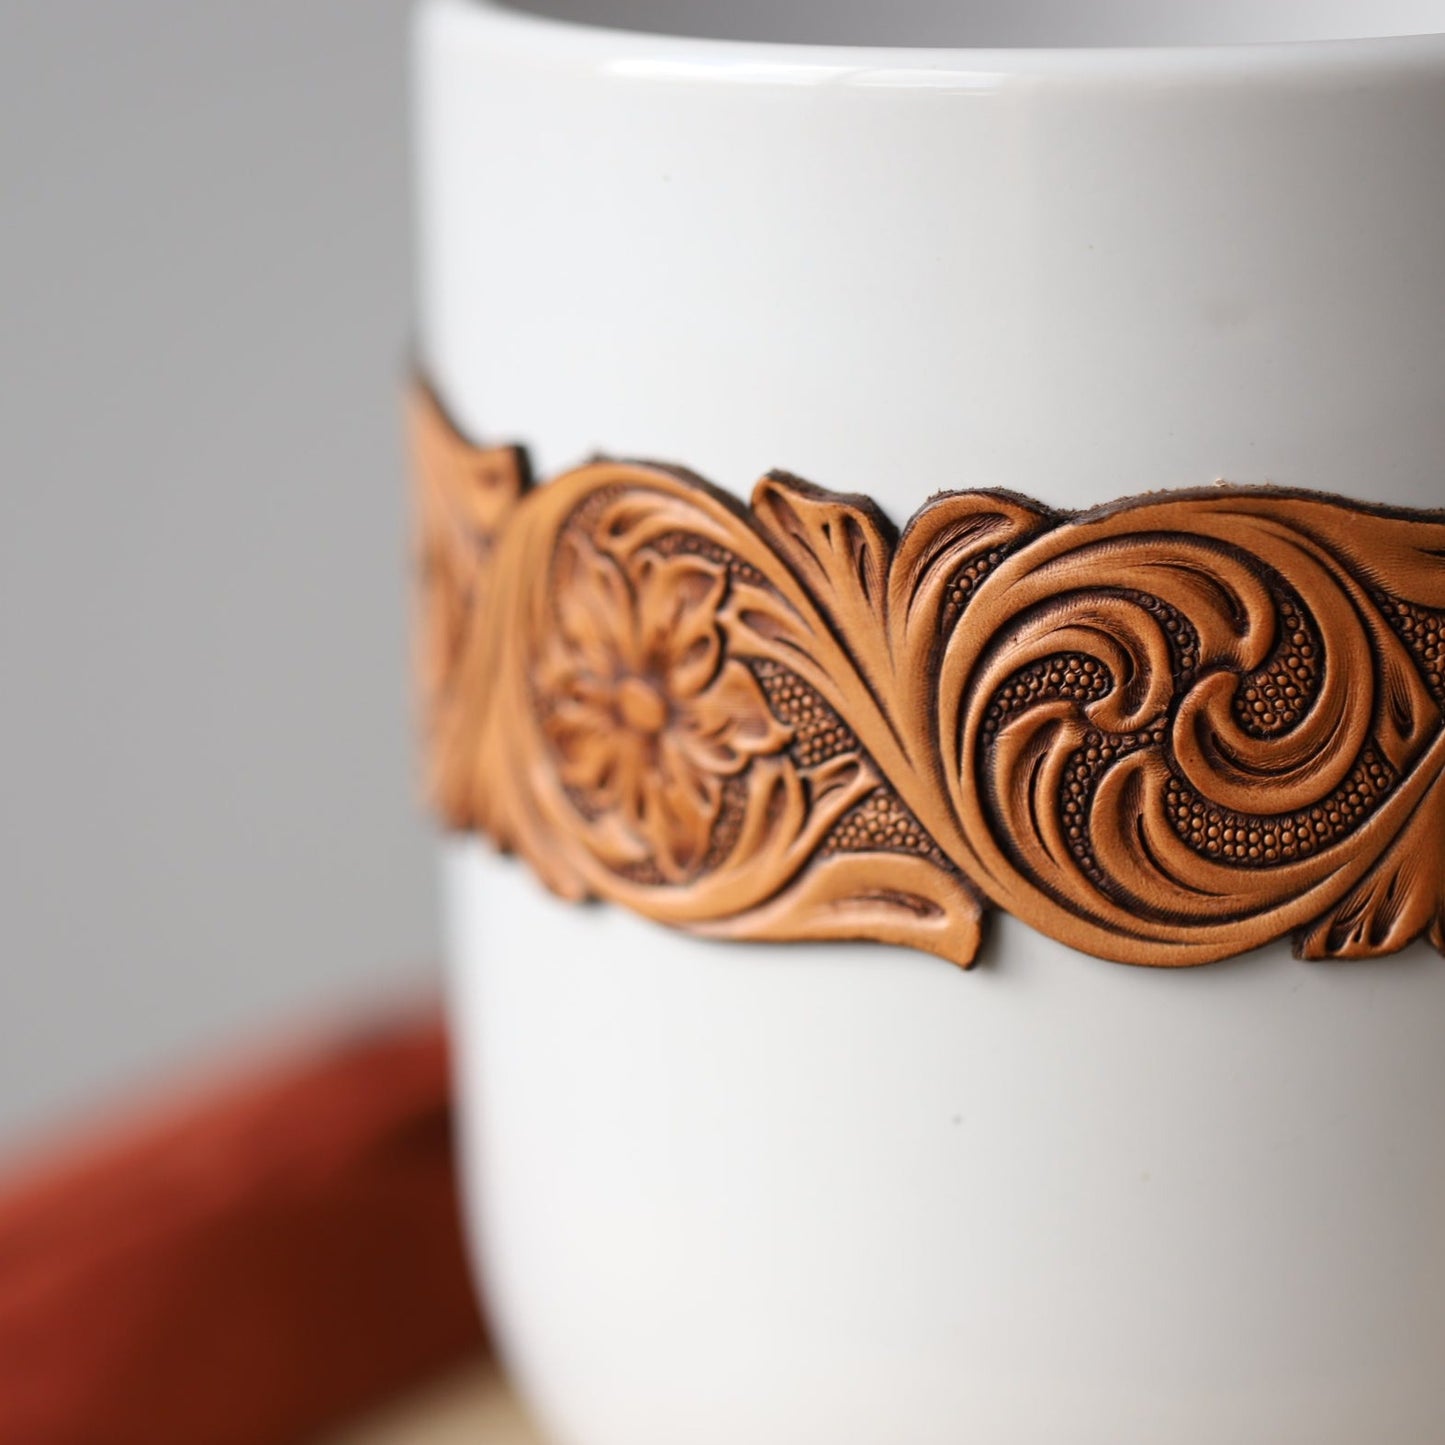 White Plant Pot with Floral Tooled Band